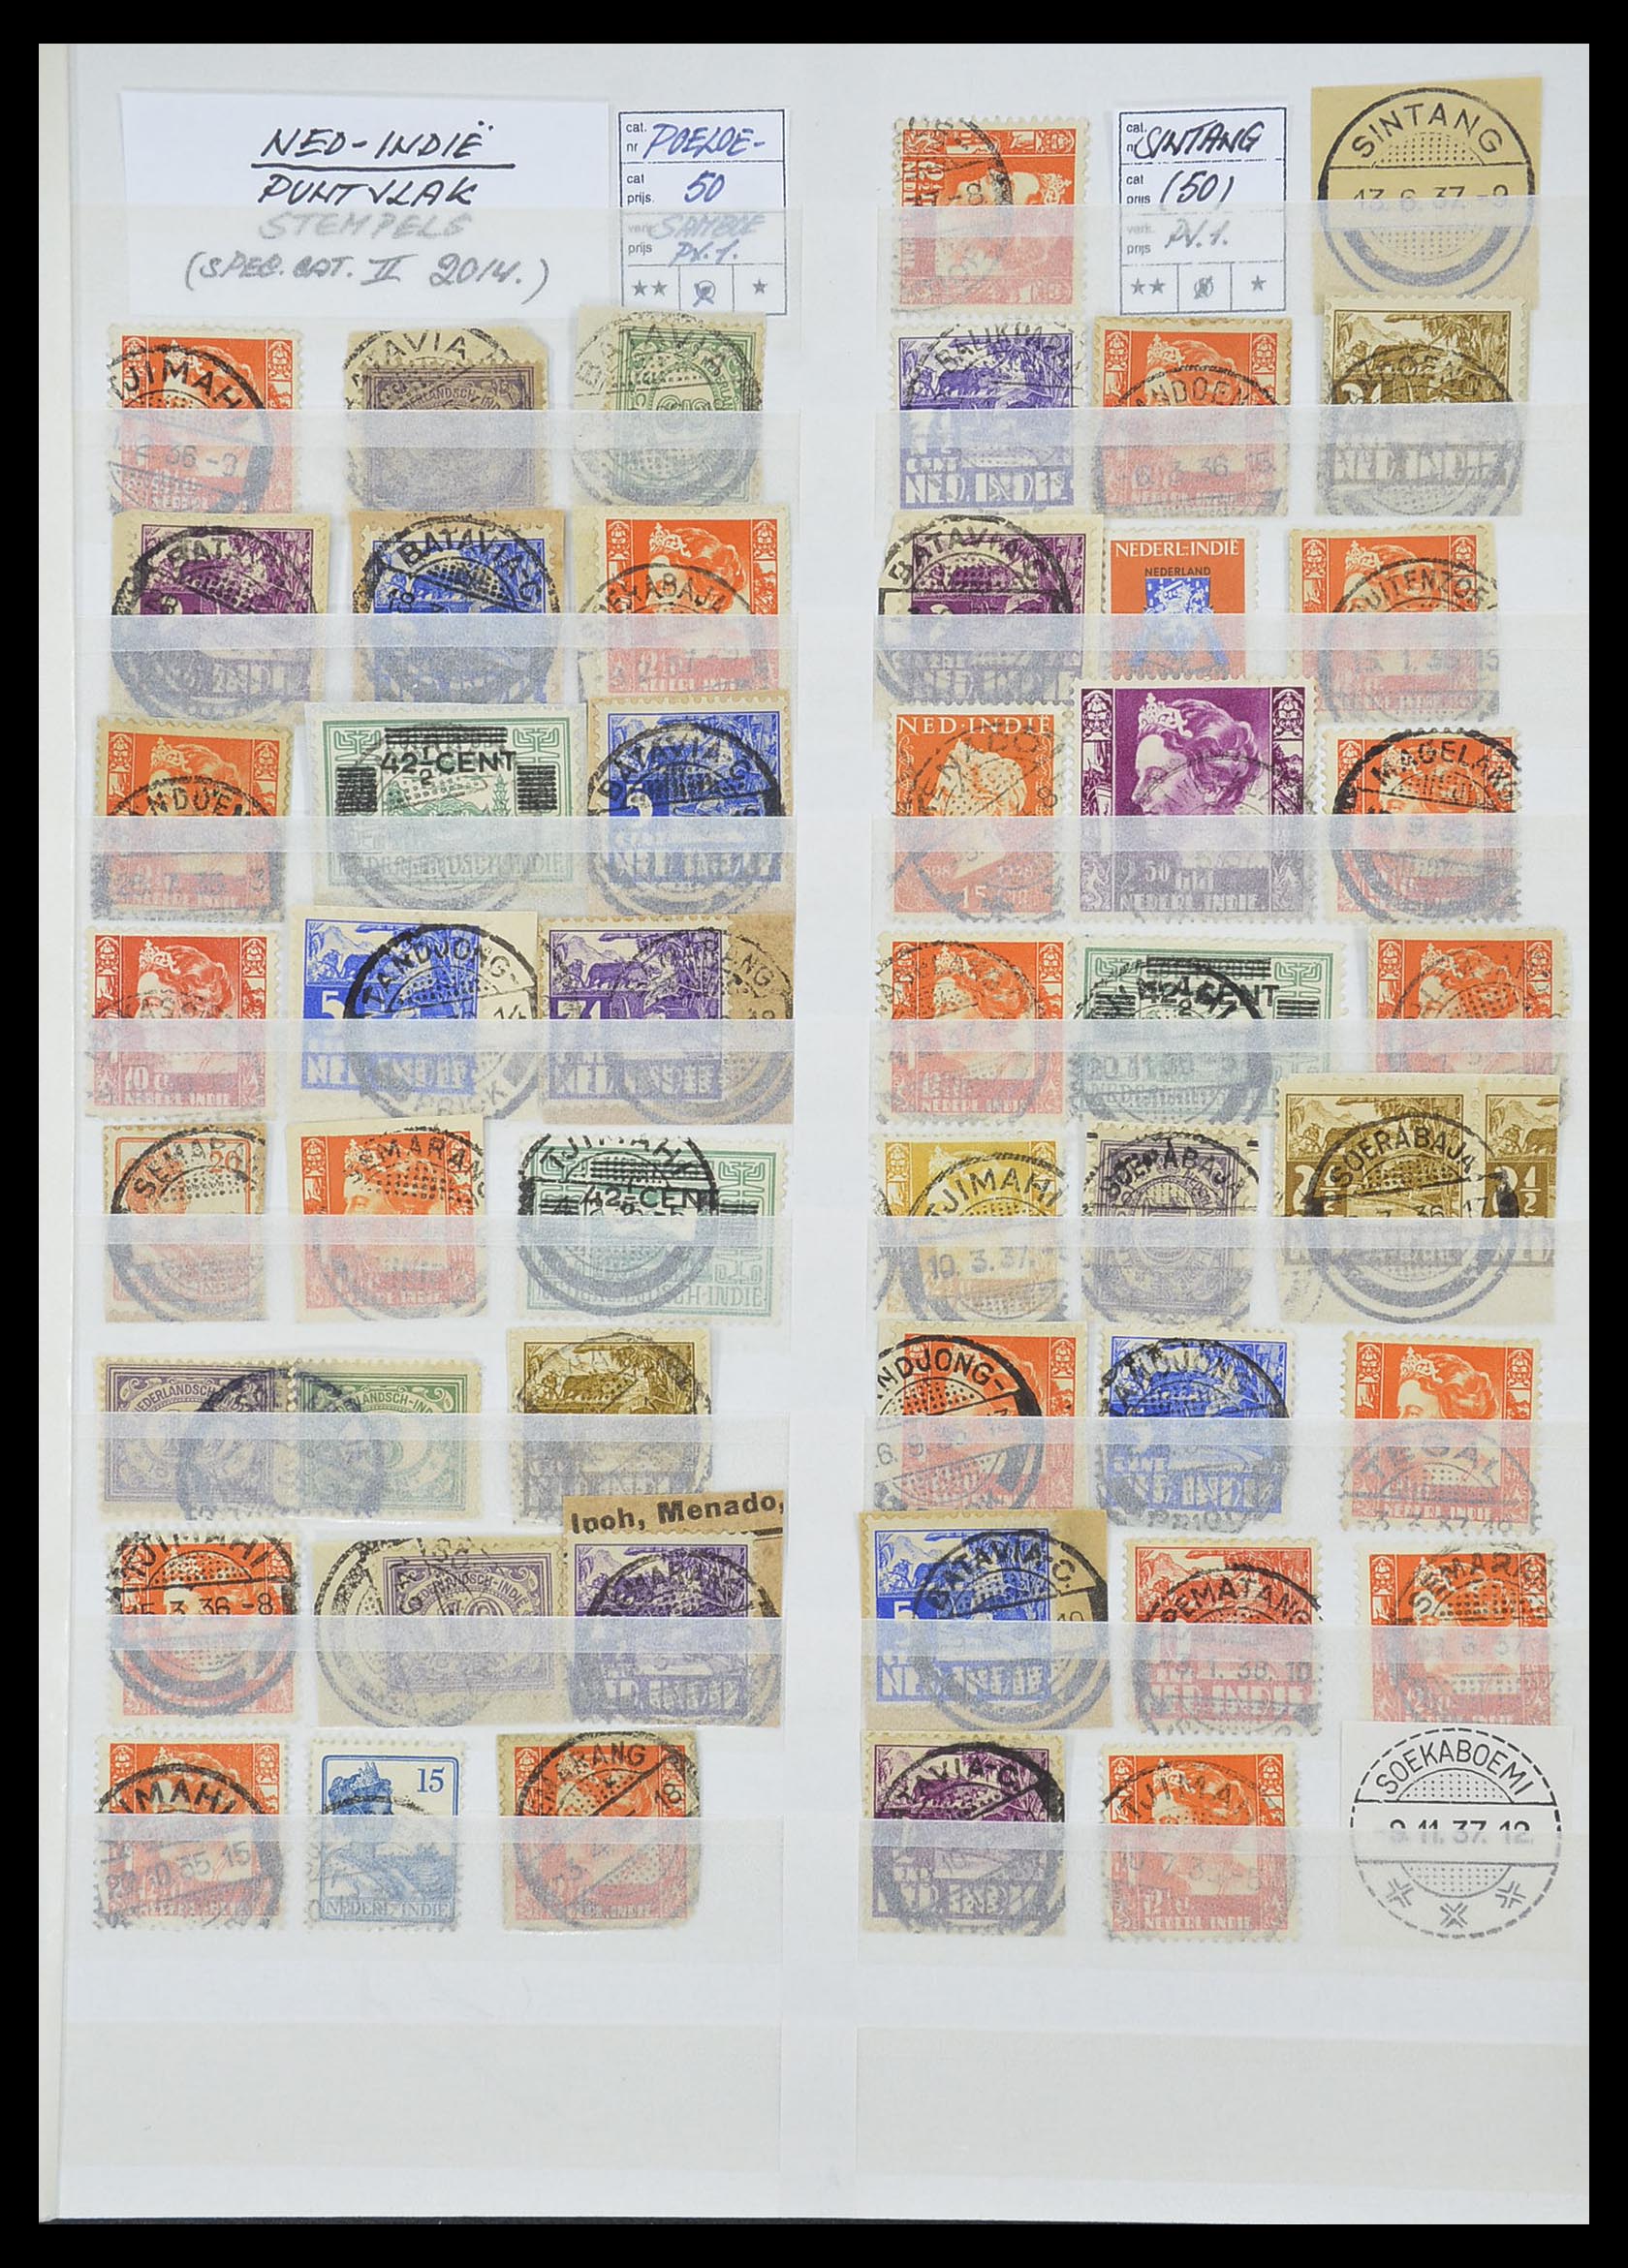 33718 015 - Stamp collection 33718 Dutch east Indies cancels.